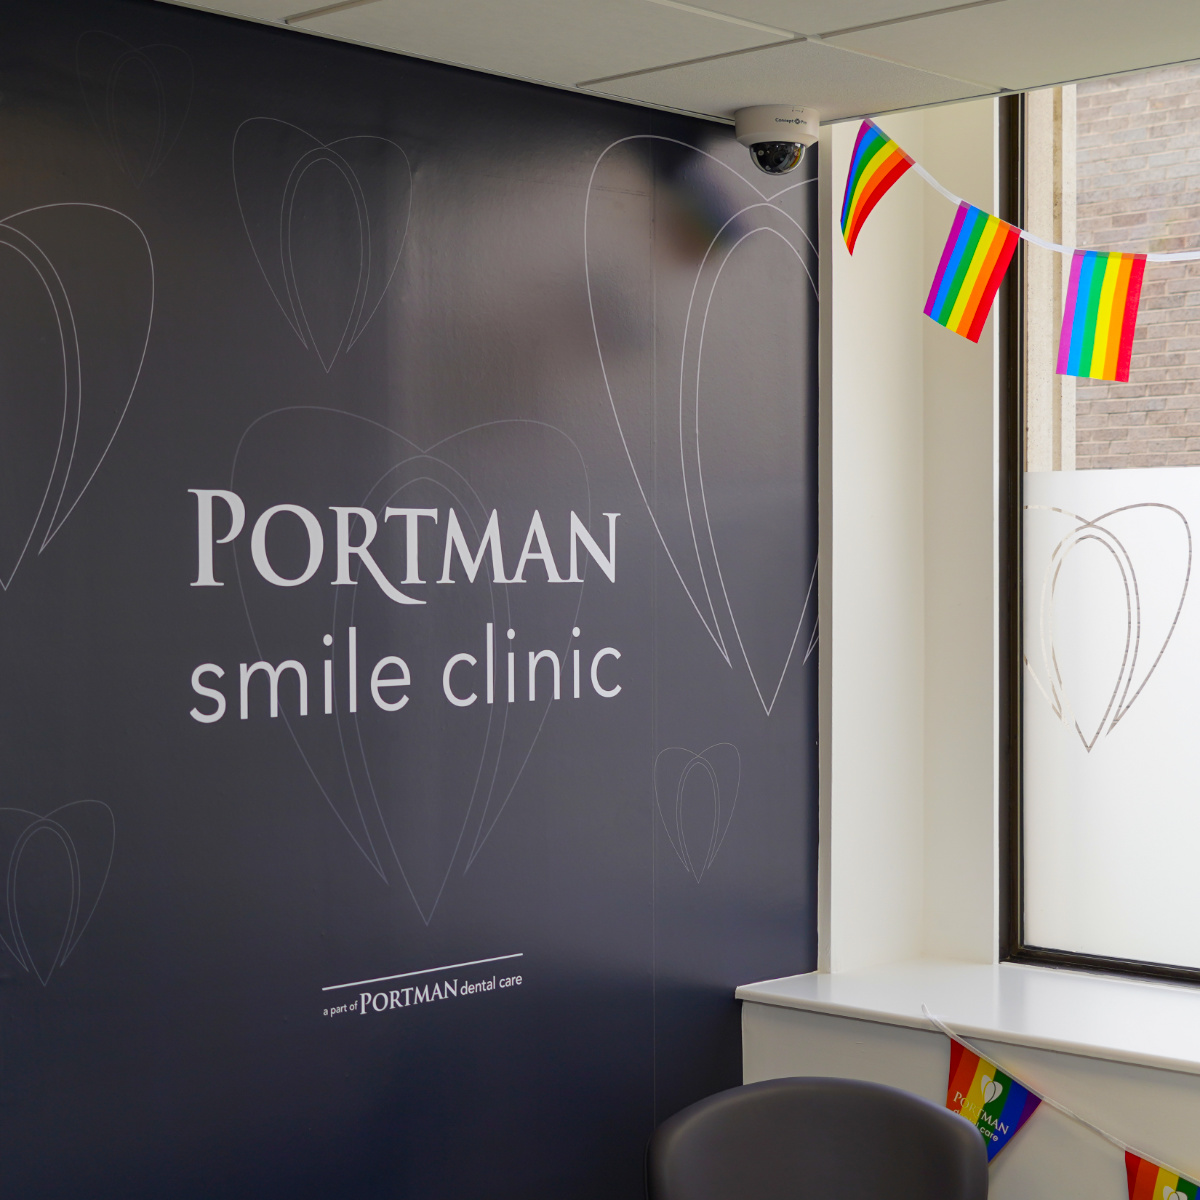 Wall mural and frosted window vinyl featuring Portman Dental branding at Portman Smile Clinic Ilkley